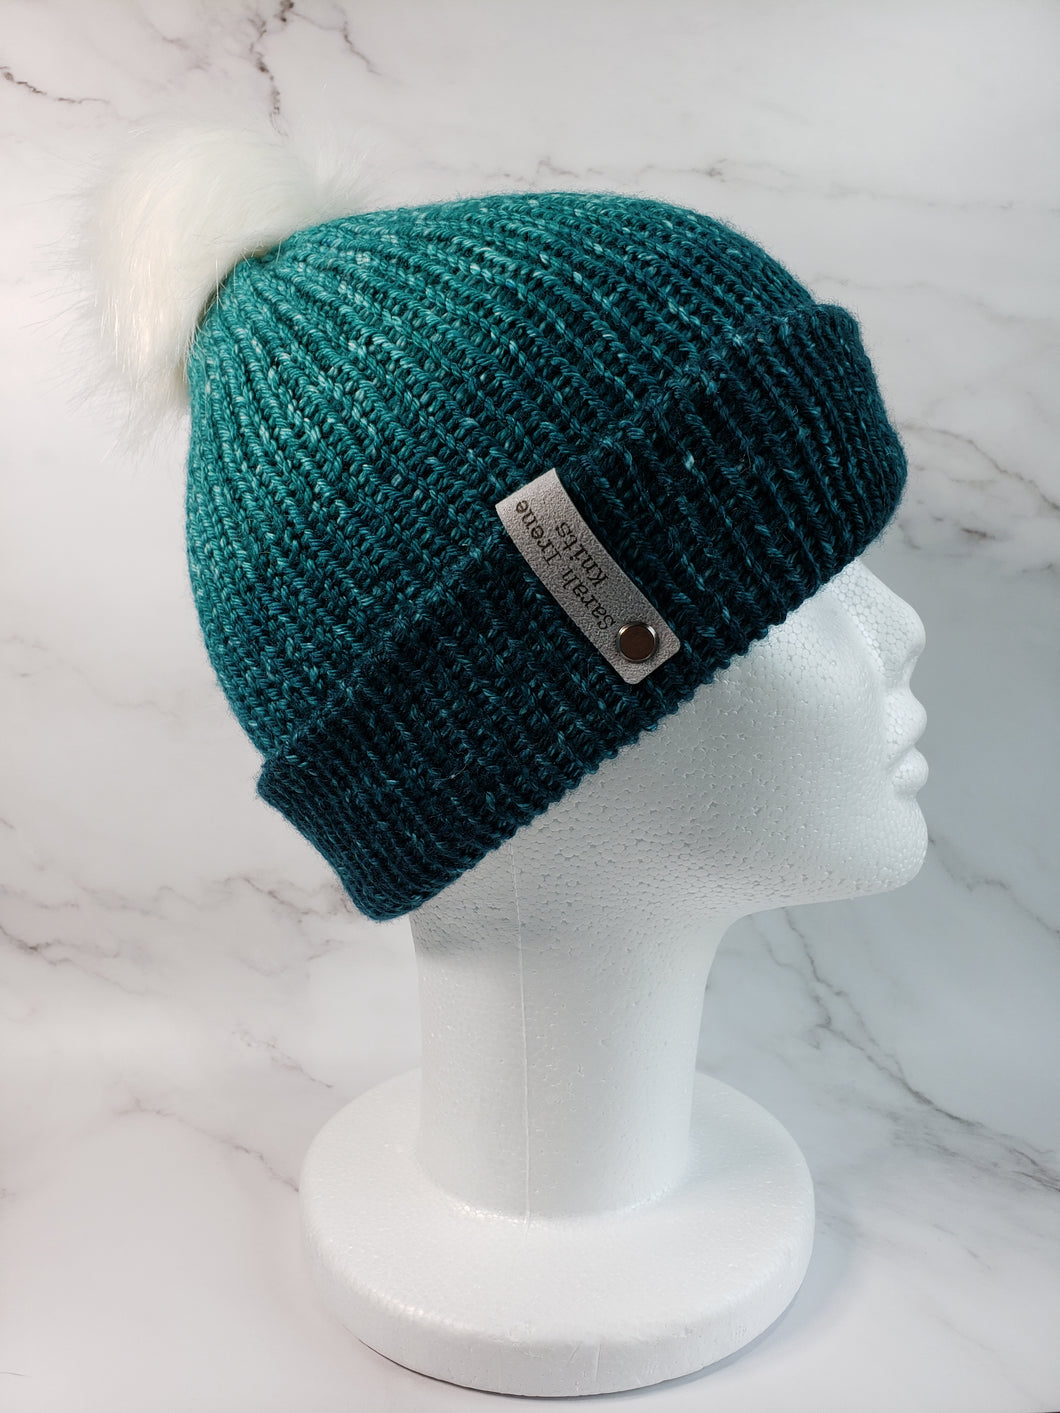 Double brim beanie in green to light green gradient. Topped with white faux fur pom.